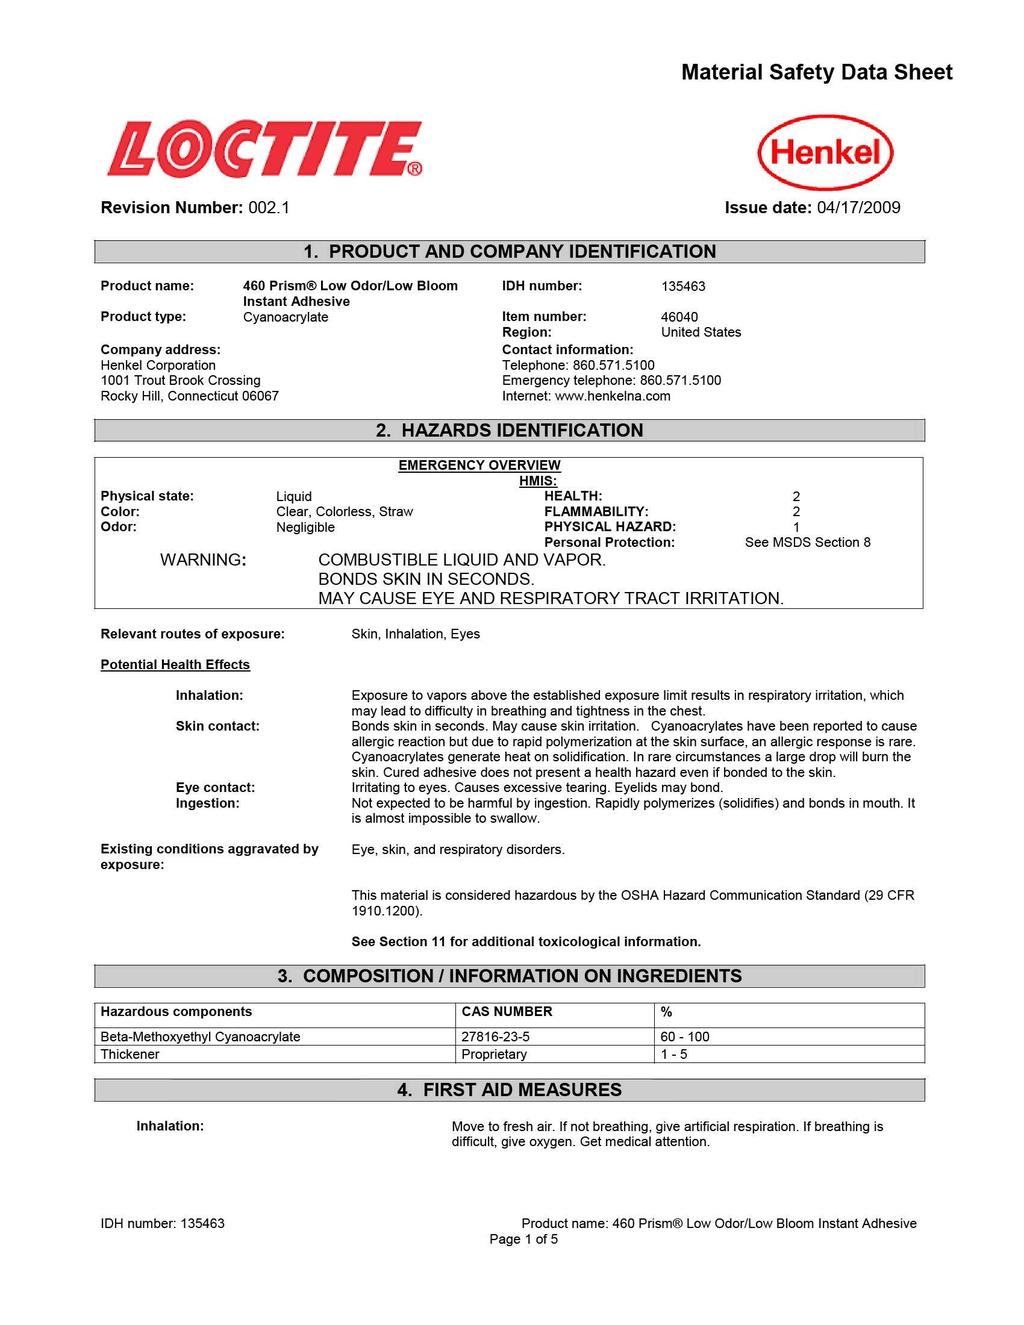 Material Safety Data Sheet ilmritl Henkel Revision Number: 002.1 Issue date: 04/17/2009 1.